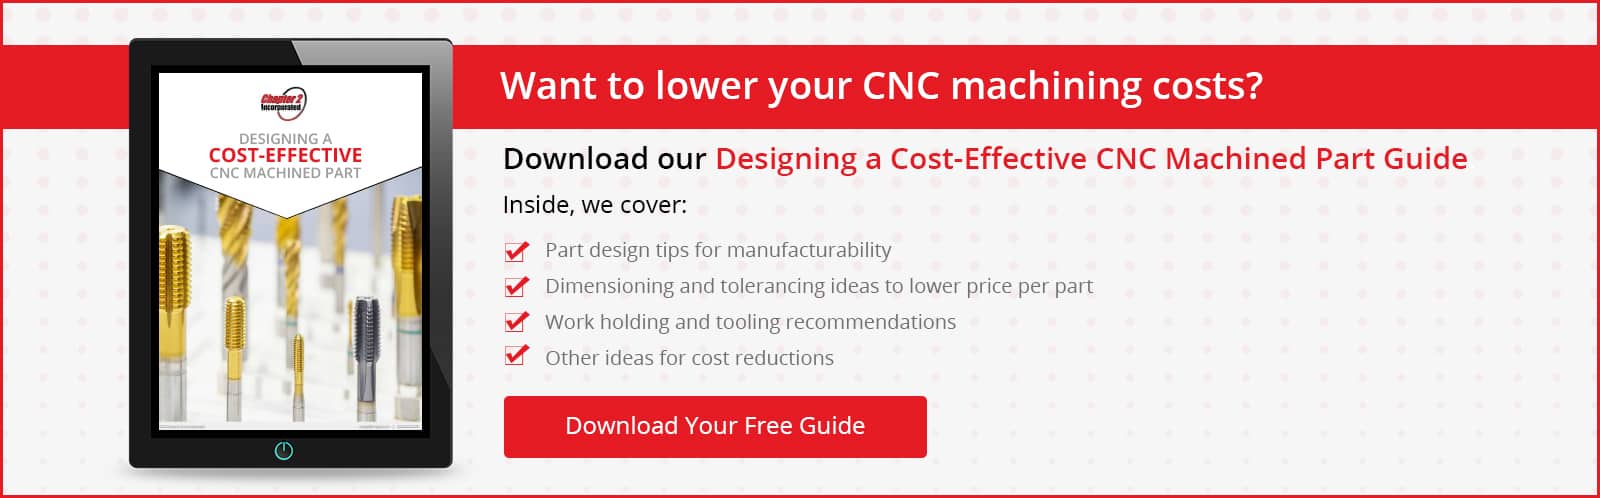 Download our e-guide on Designing a Cost Effective CNC Machined Part